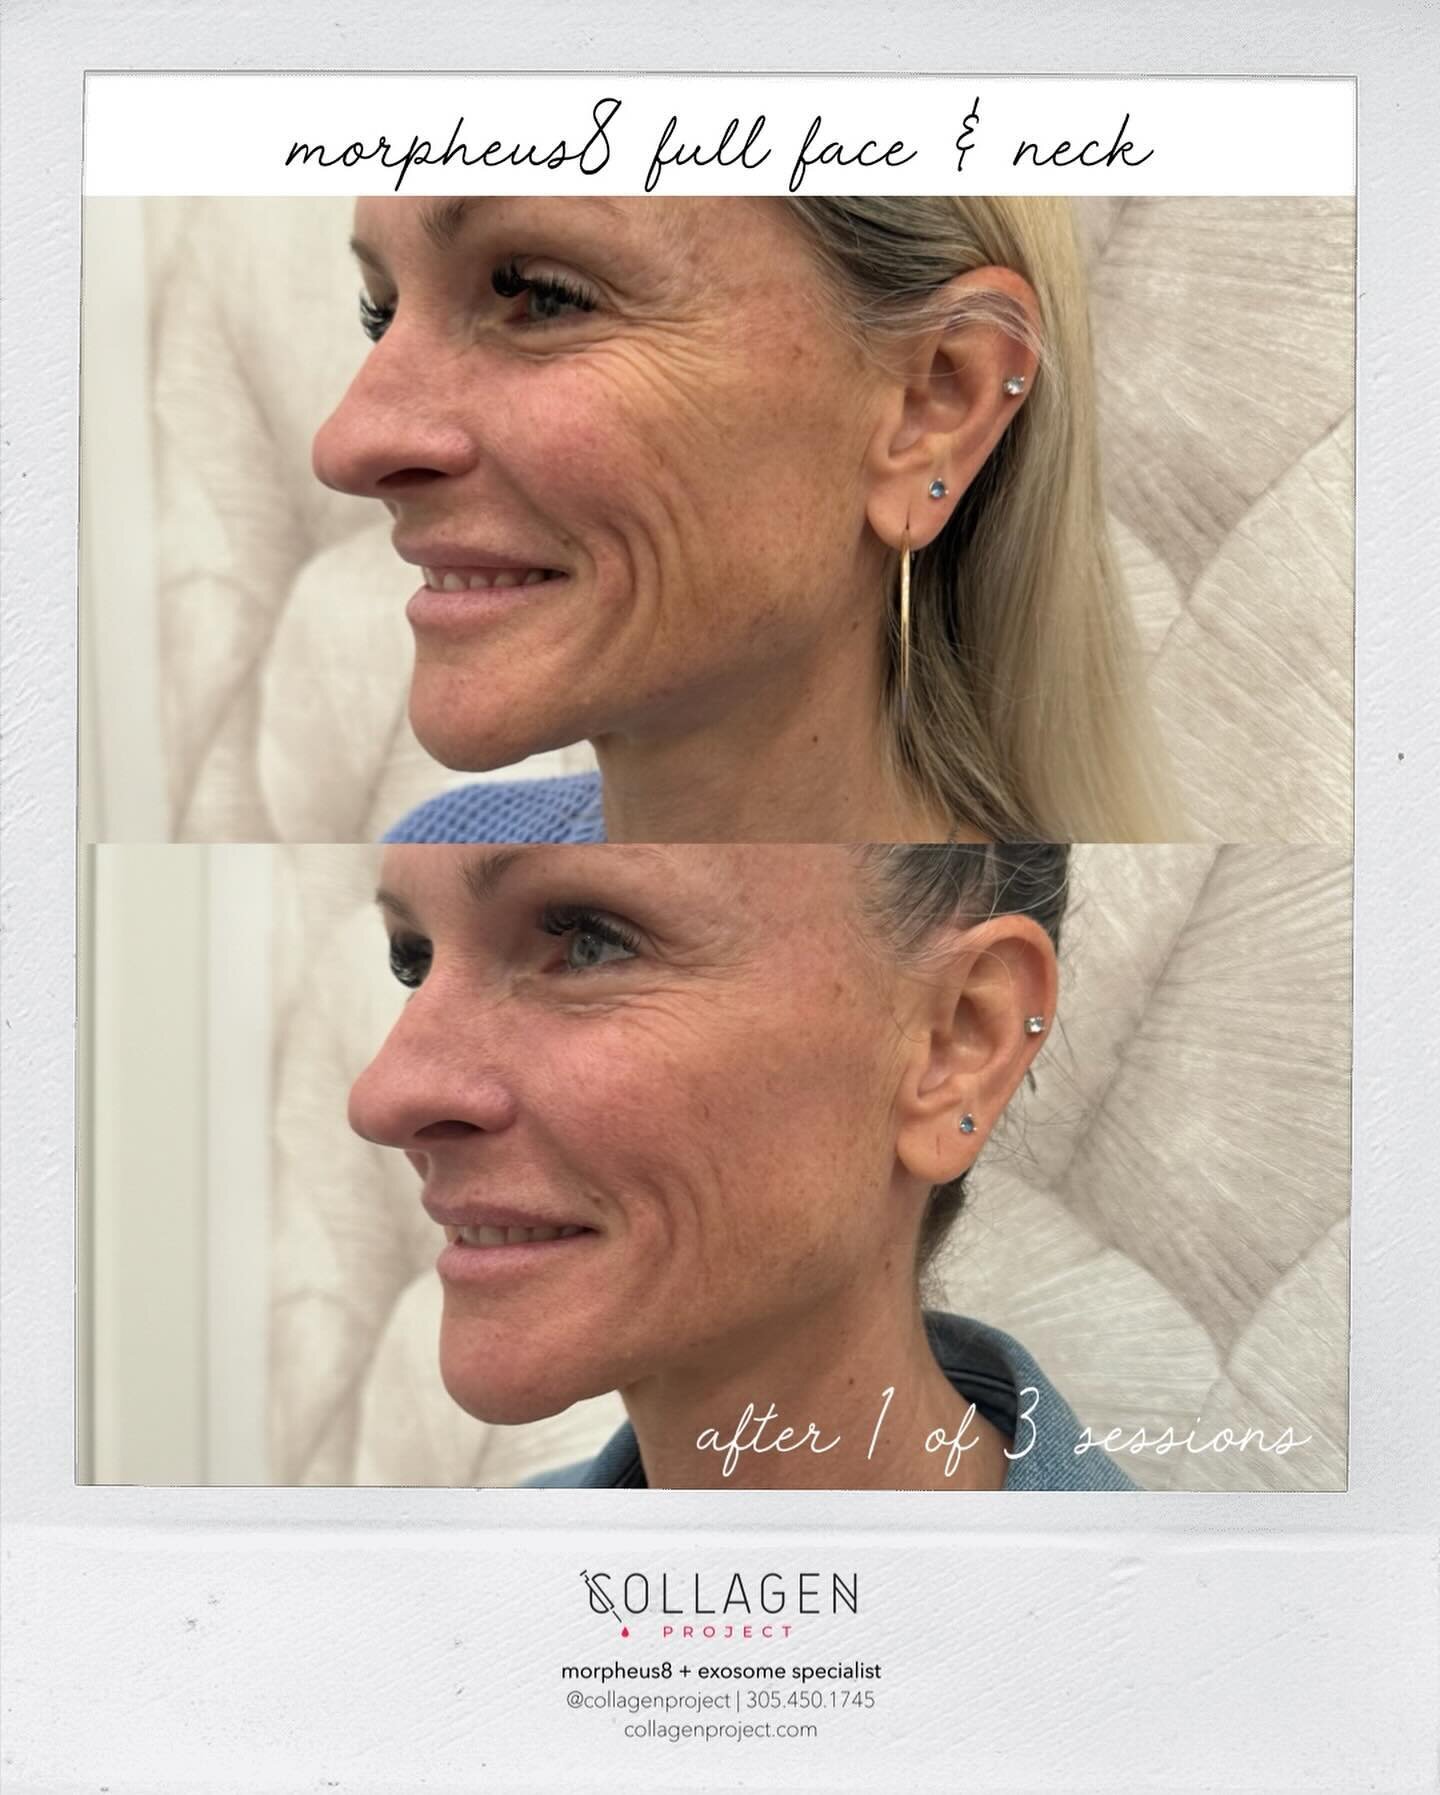 Morpheus8 full face &amp; neck after 1 of 3 sessions.
════════
morpheus8 + exosomes
❥❥❥Why We Love It
✓ Strongest and most effective non surgical skin tightness procedure available 
✓ Minimal downtime 
✓ Remodels skin tissue on a cellular level
✓ Bui